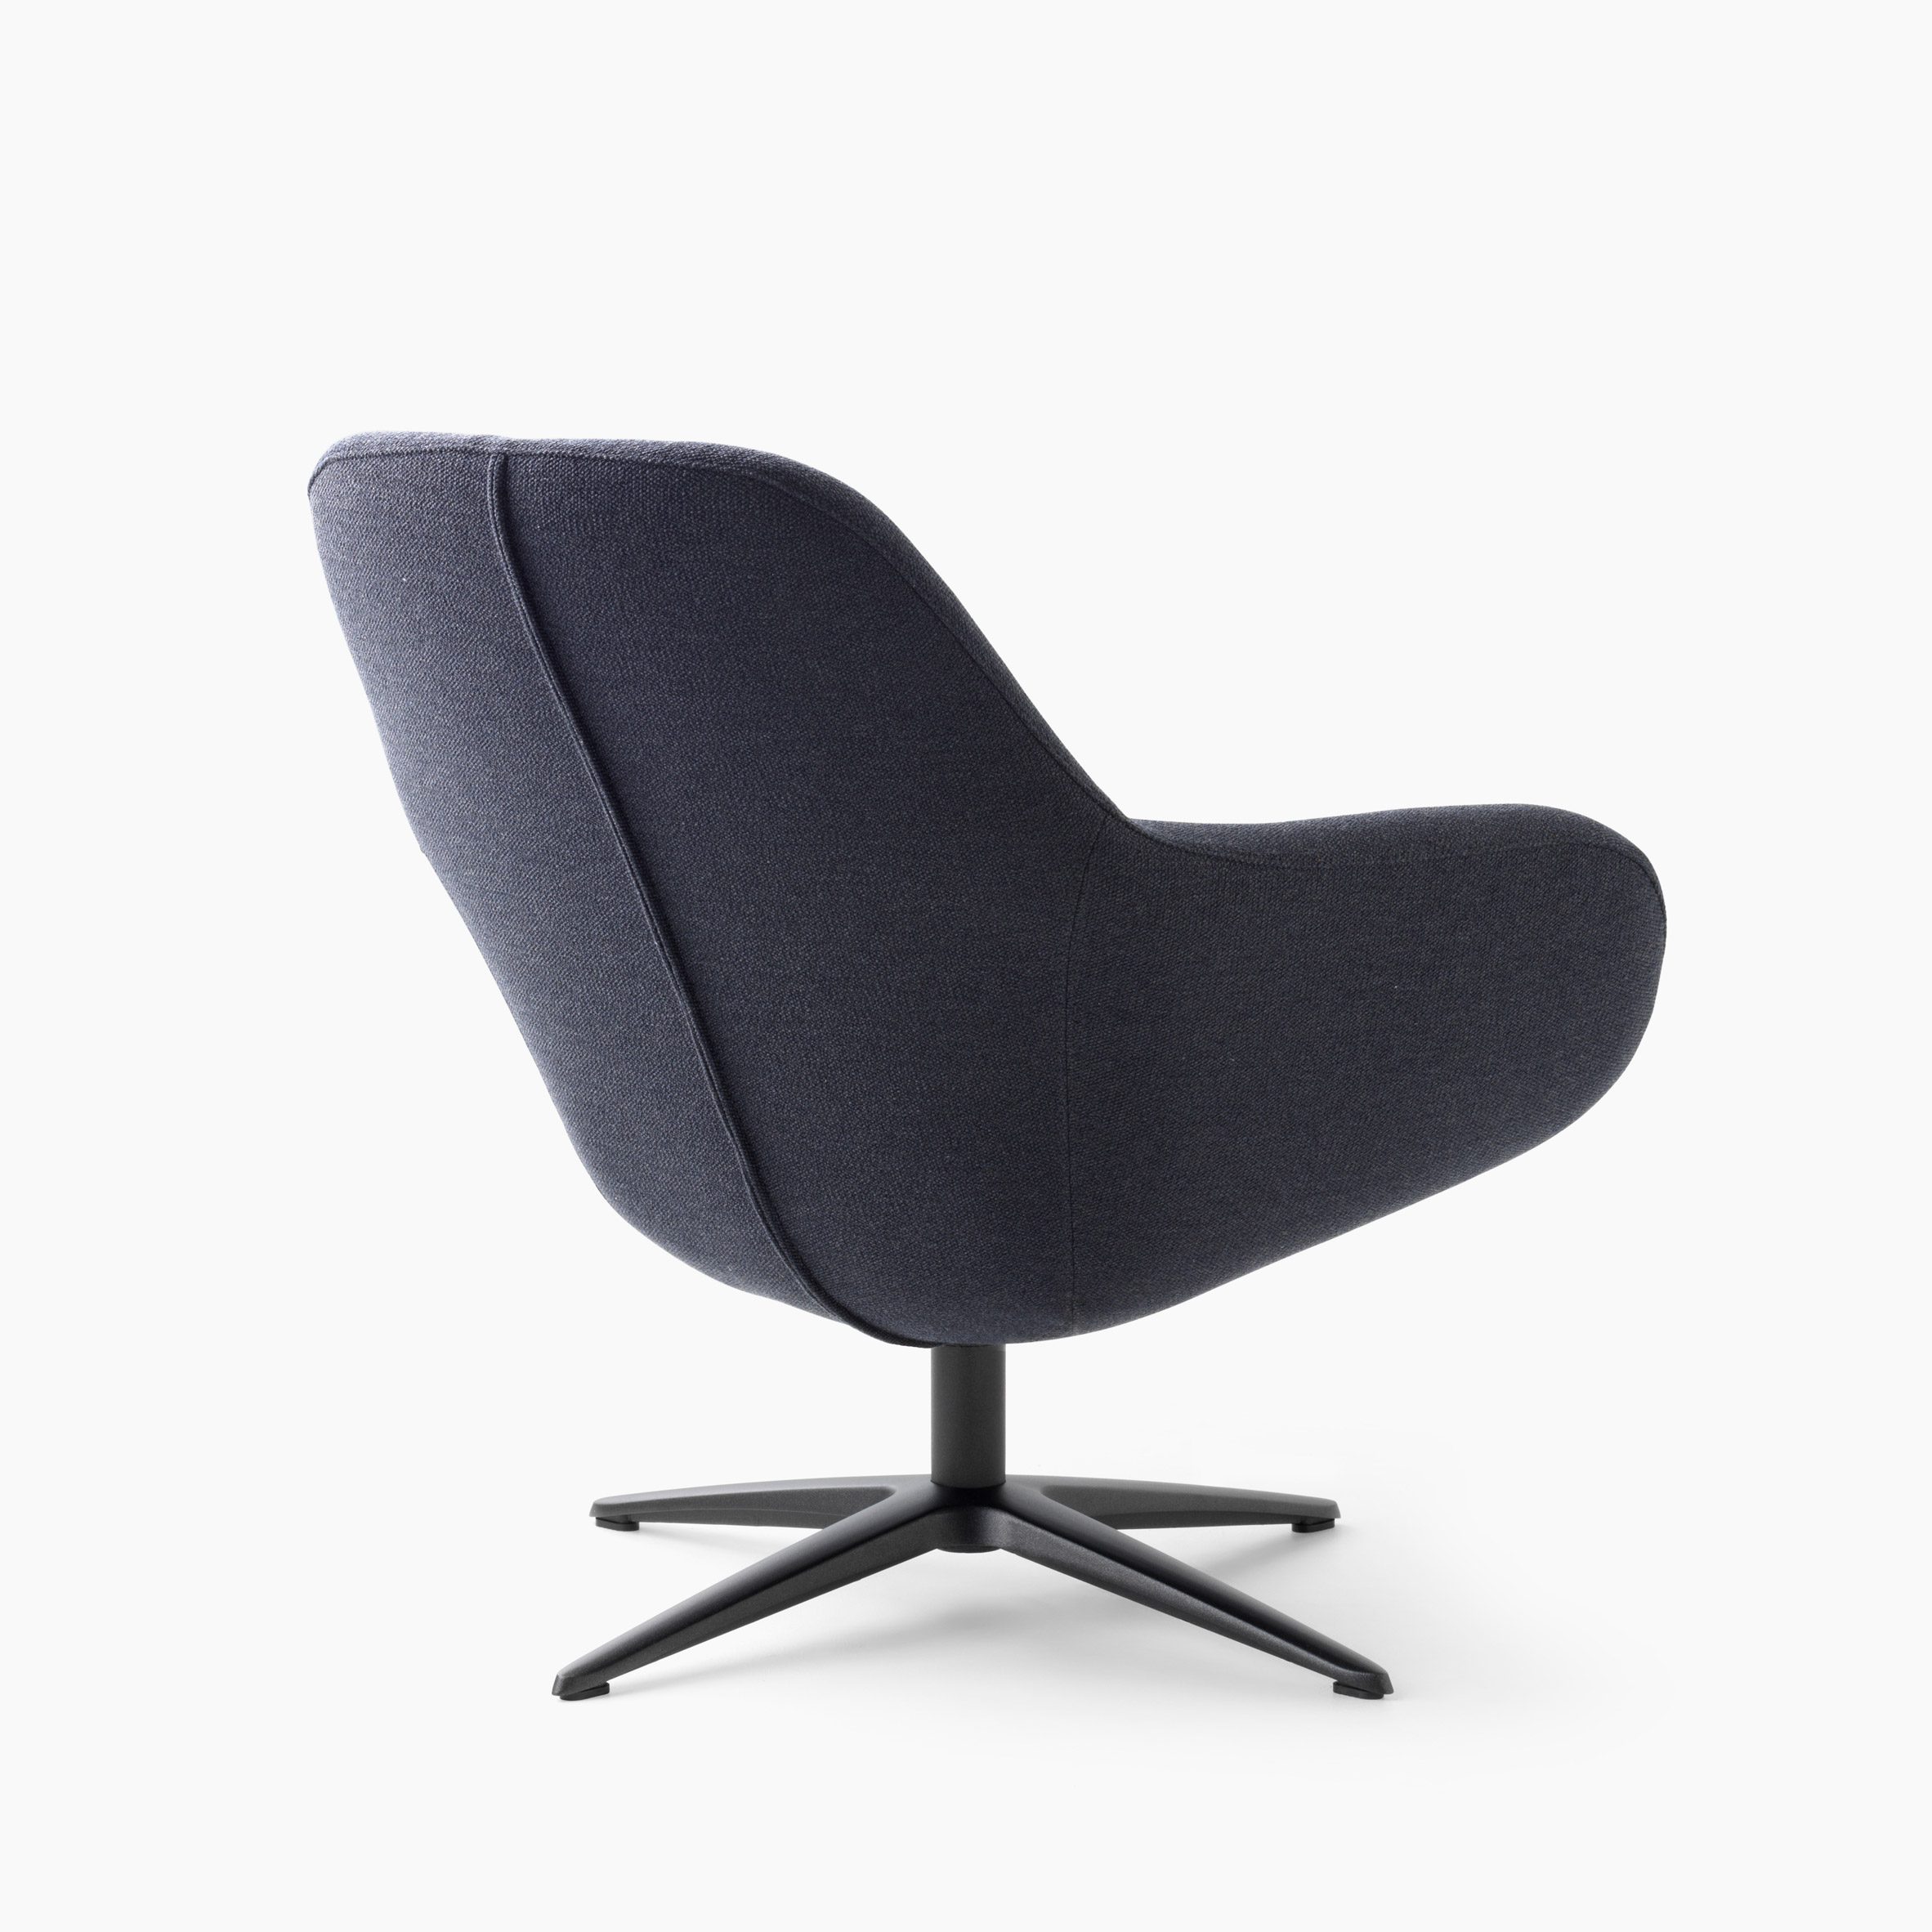 A low-backed LXR03 chair